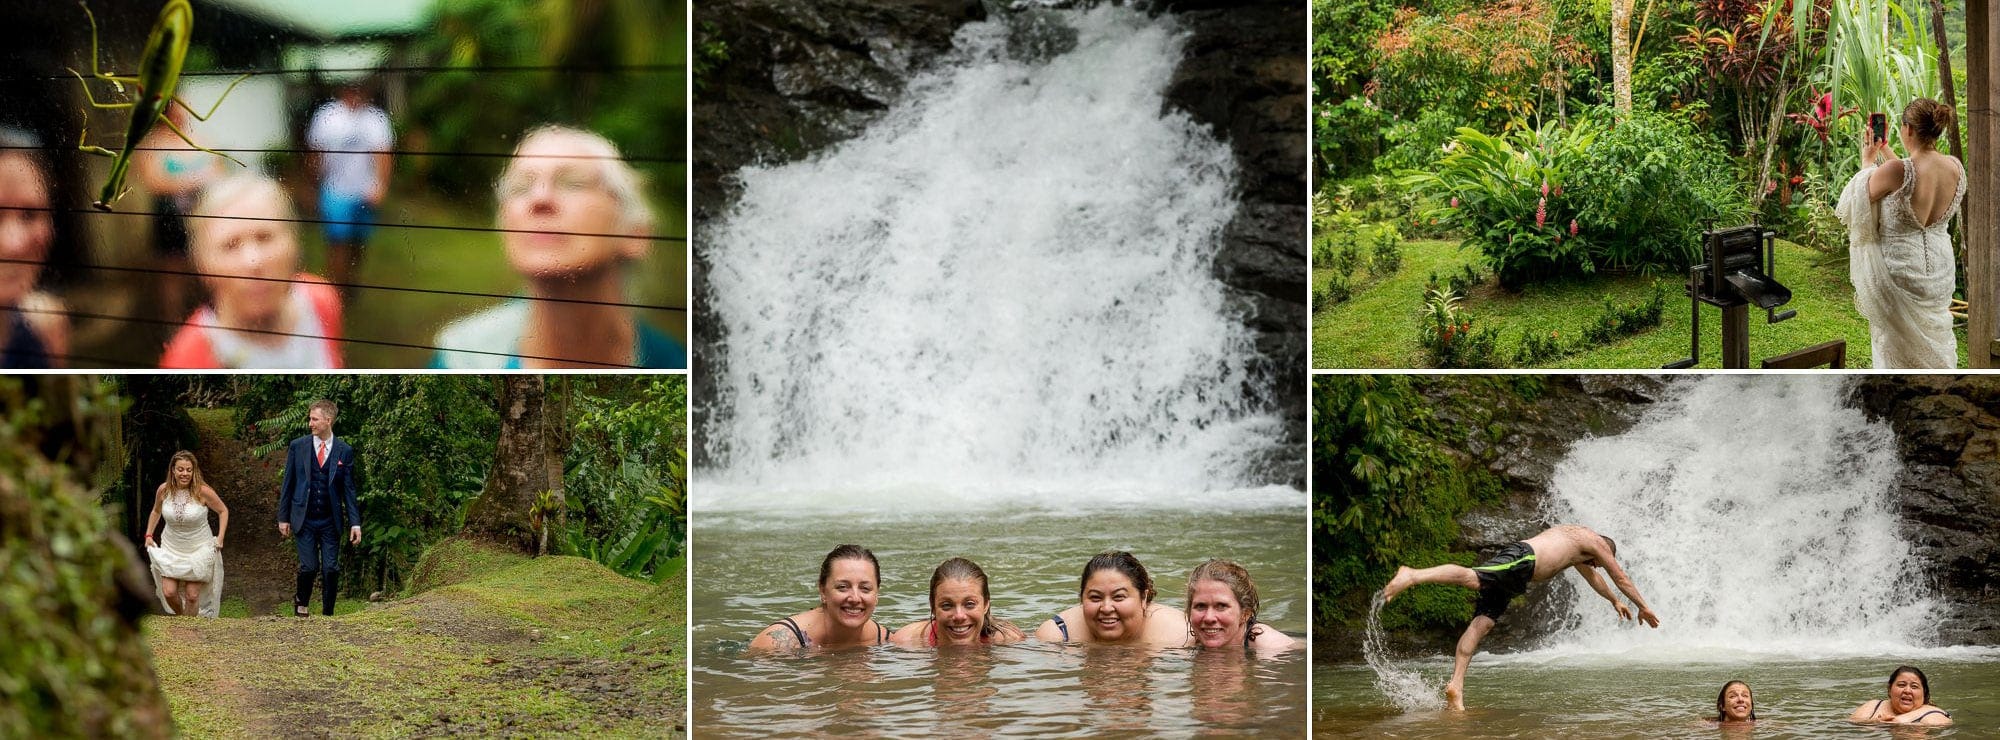 Playing in the water off the beaten path in Costa Rica